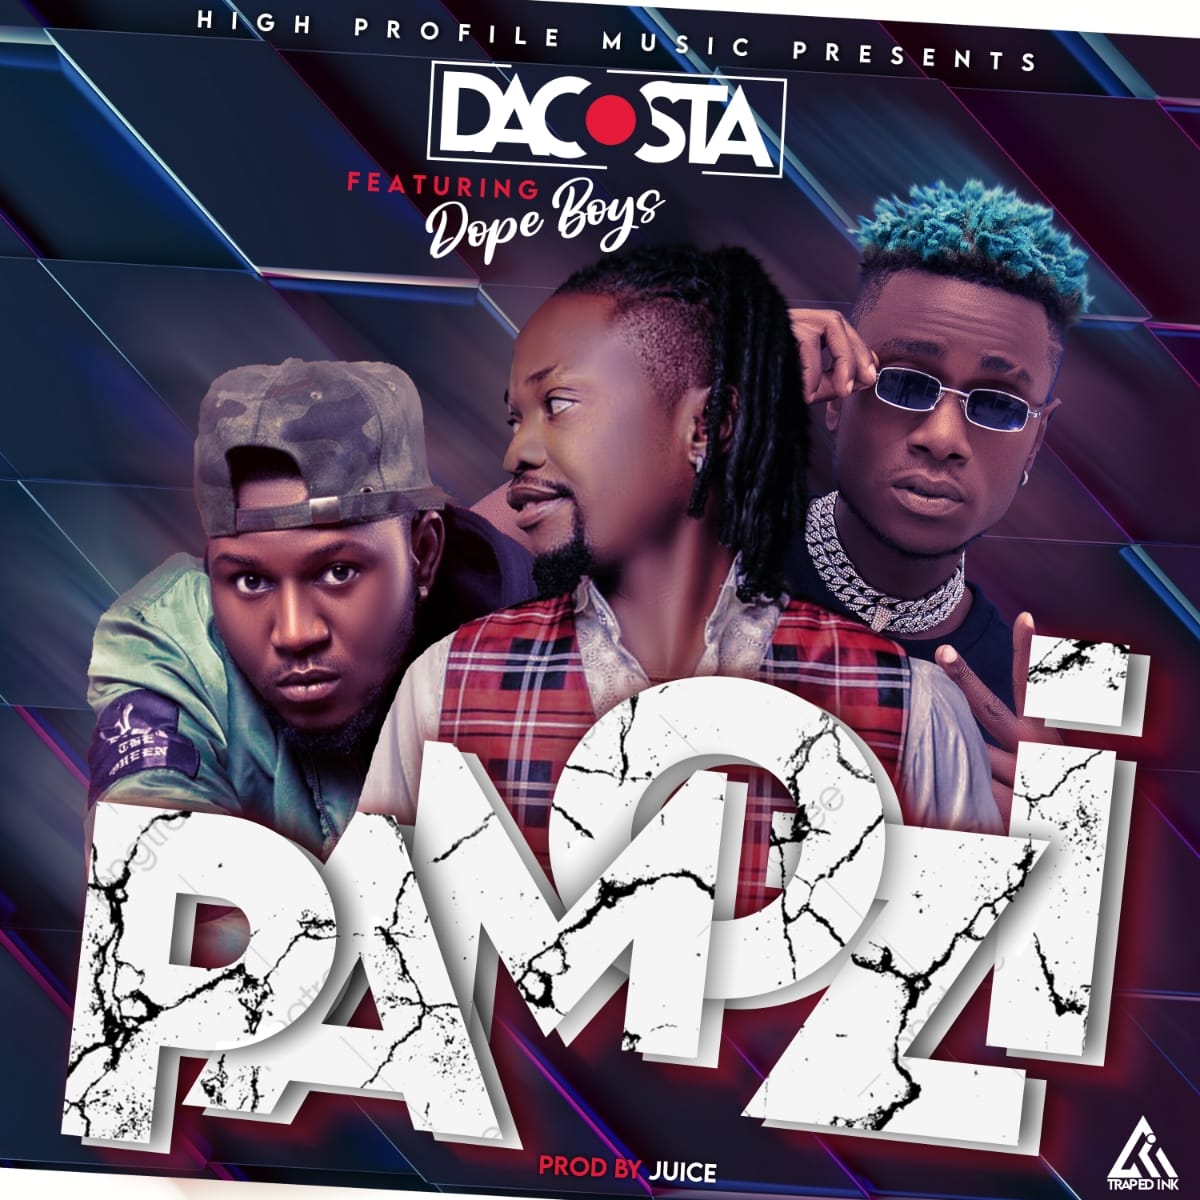 DOWNLOAD: Dacosta Feat. Dope Boys – “Pamozi” Mp3